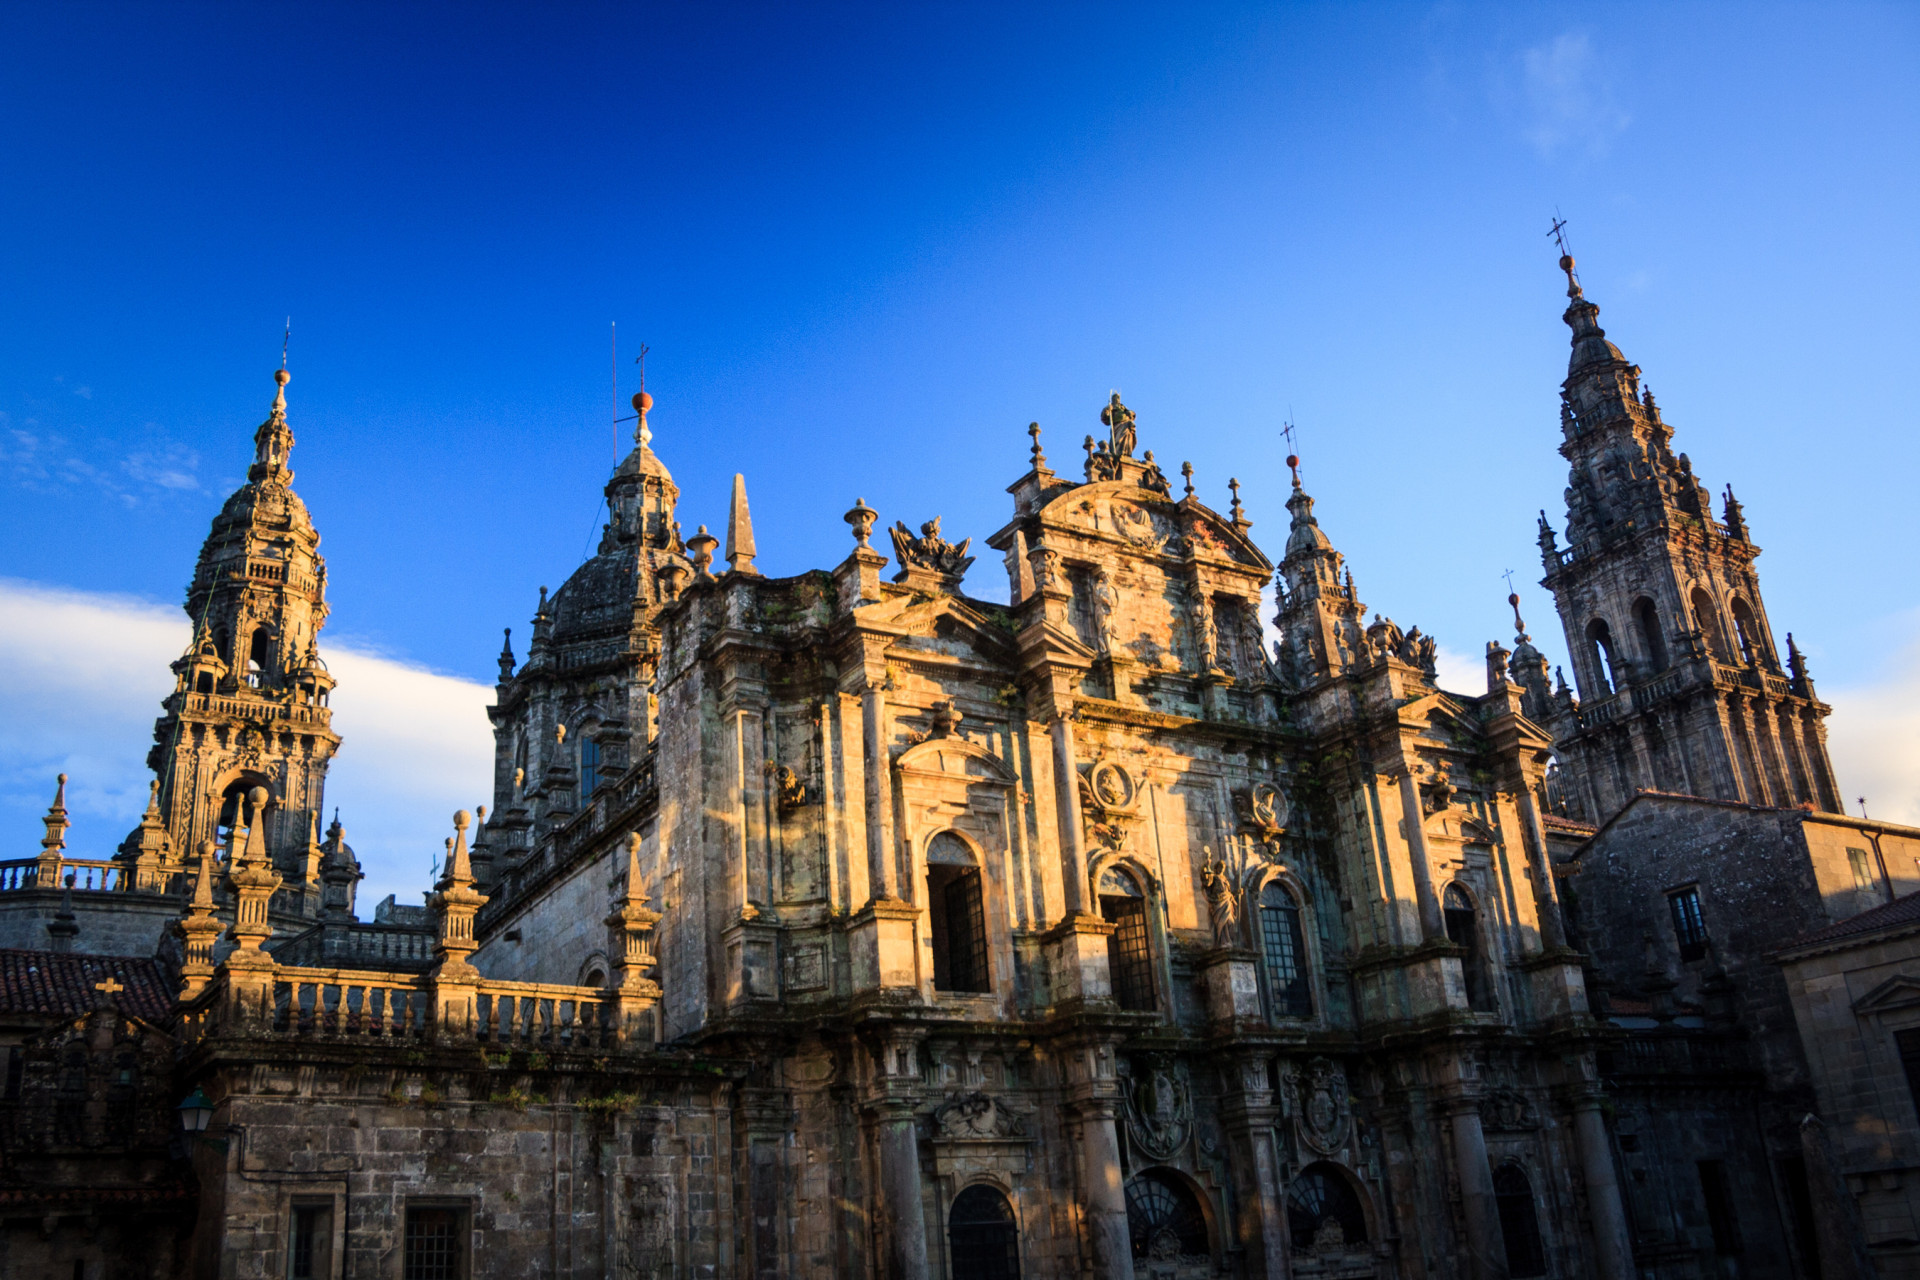 Santiago de Compostela, Spain, is famous for its pilgrimage route, which attracts not only religious people but also tourists in general.<p>You may also like:<a href="https://www.starsinsider.com/n/470387?utm_source=msn.com&utm_medium=display&utm_campaign=referral_description&utm_content=210974v3en-ae"> Alcoholism: Do you know the signs?</a></p>